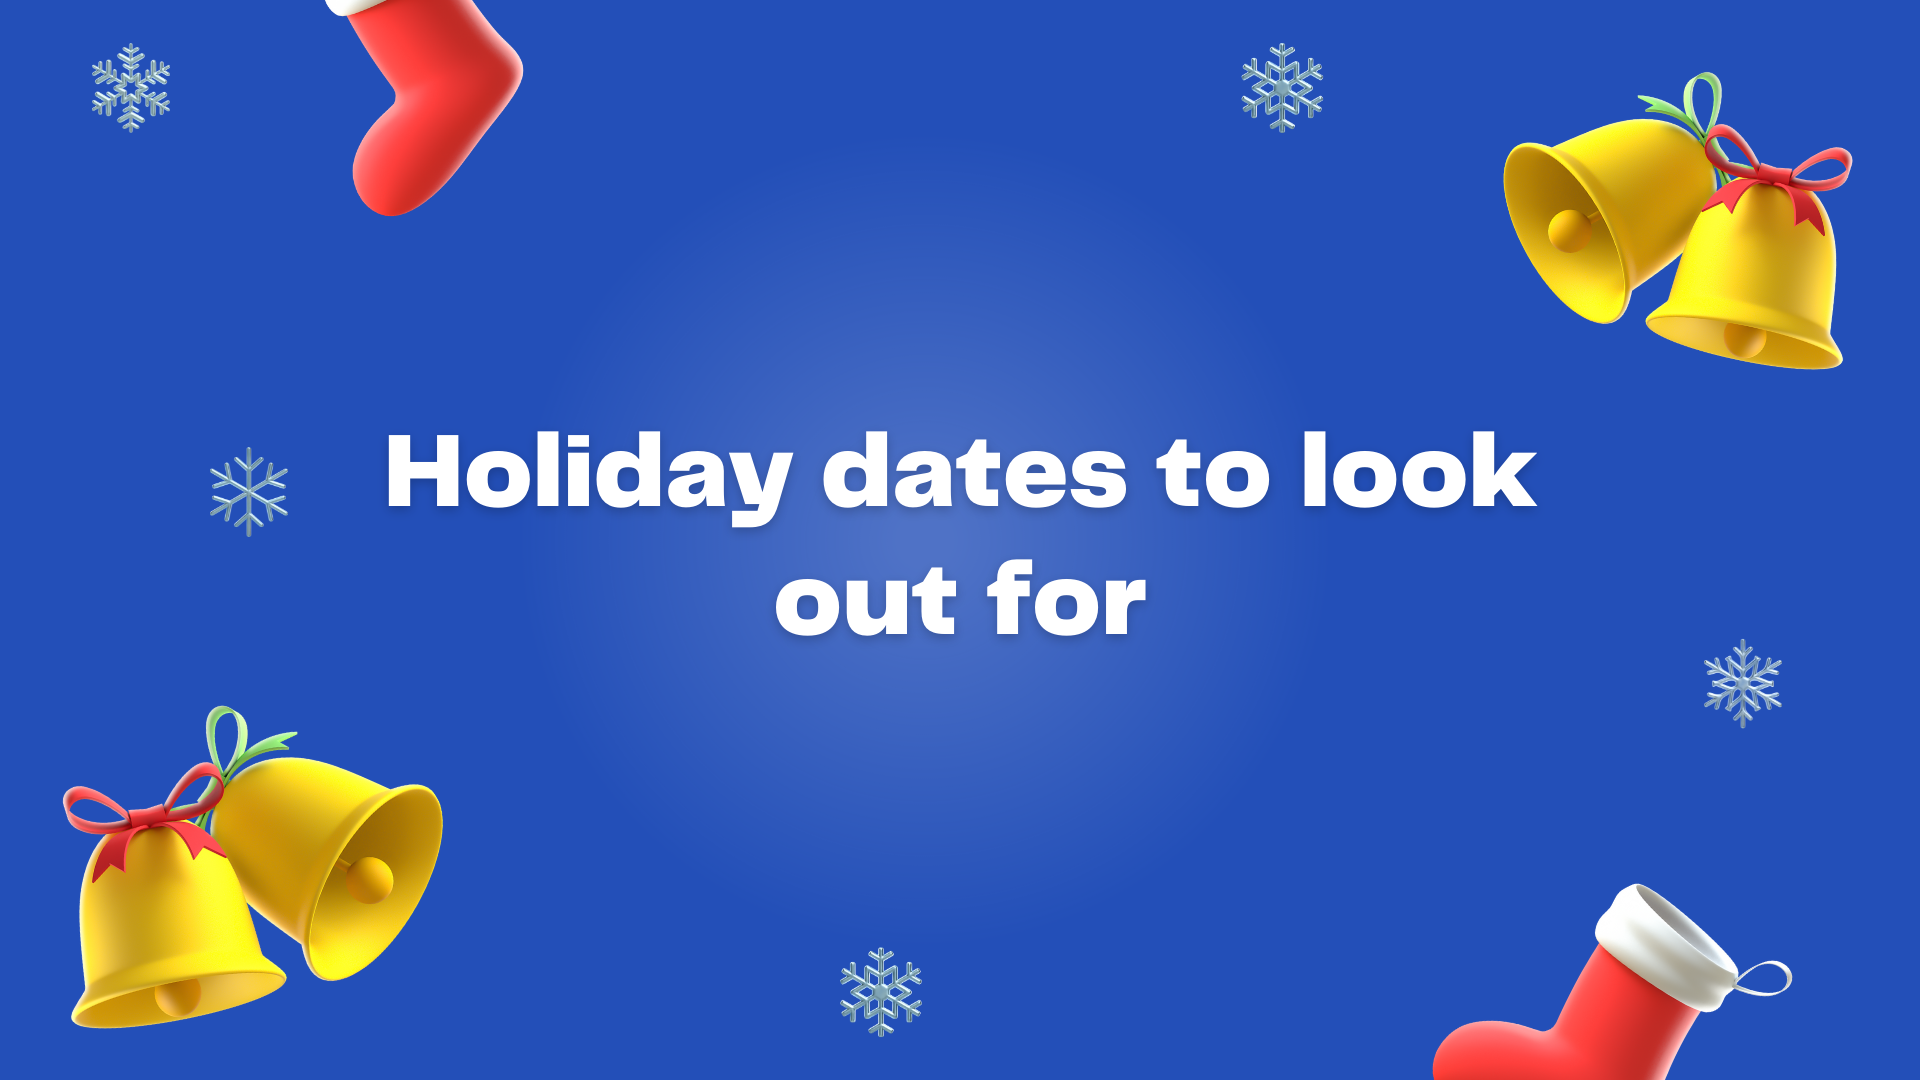 Holiday dates to look out for